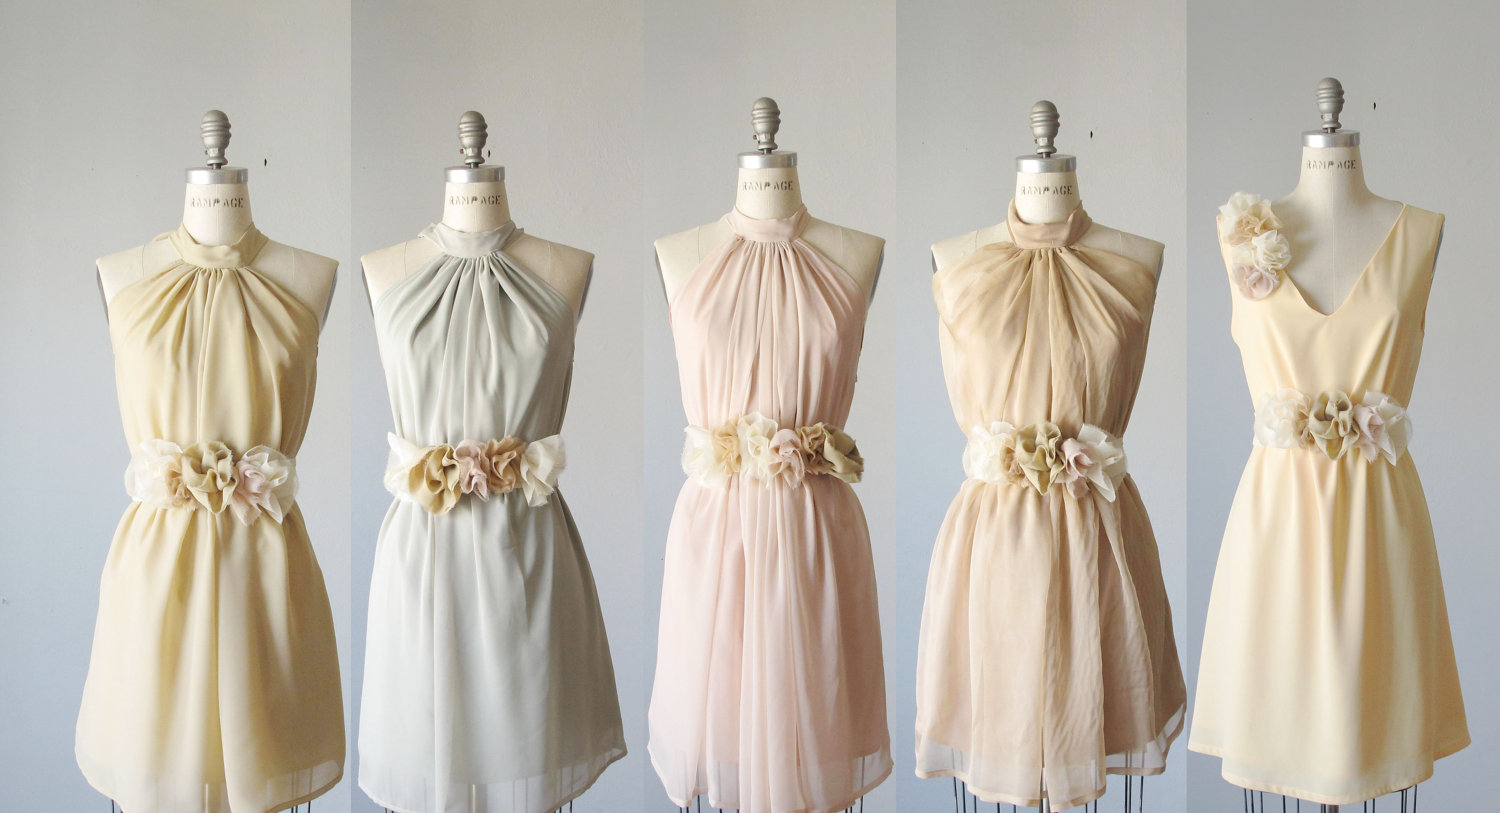 Mismatched Pastel Bridesmaids Dresses from Etsy